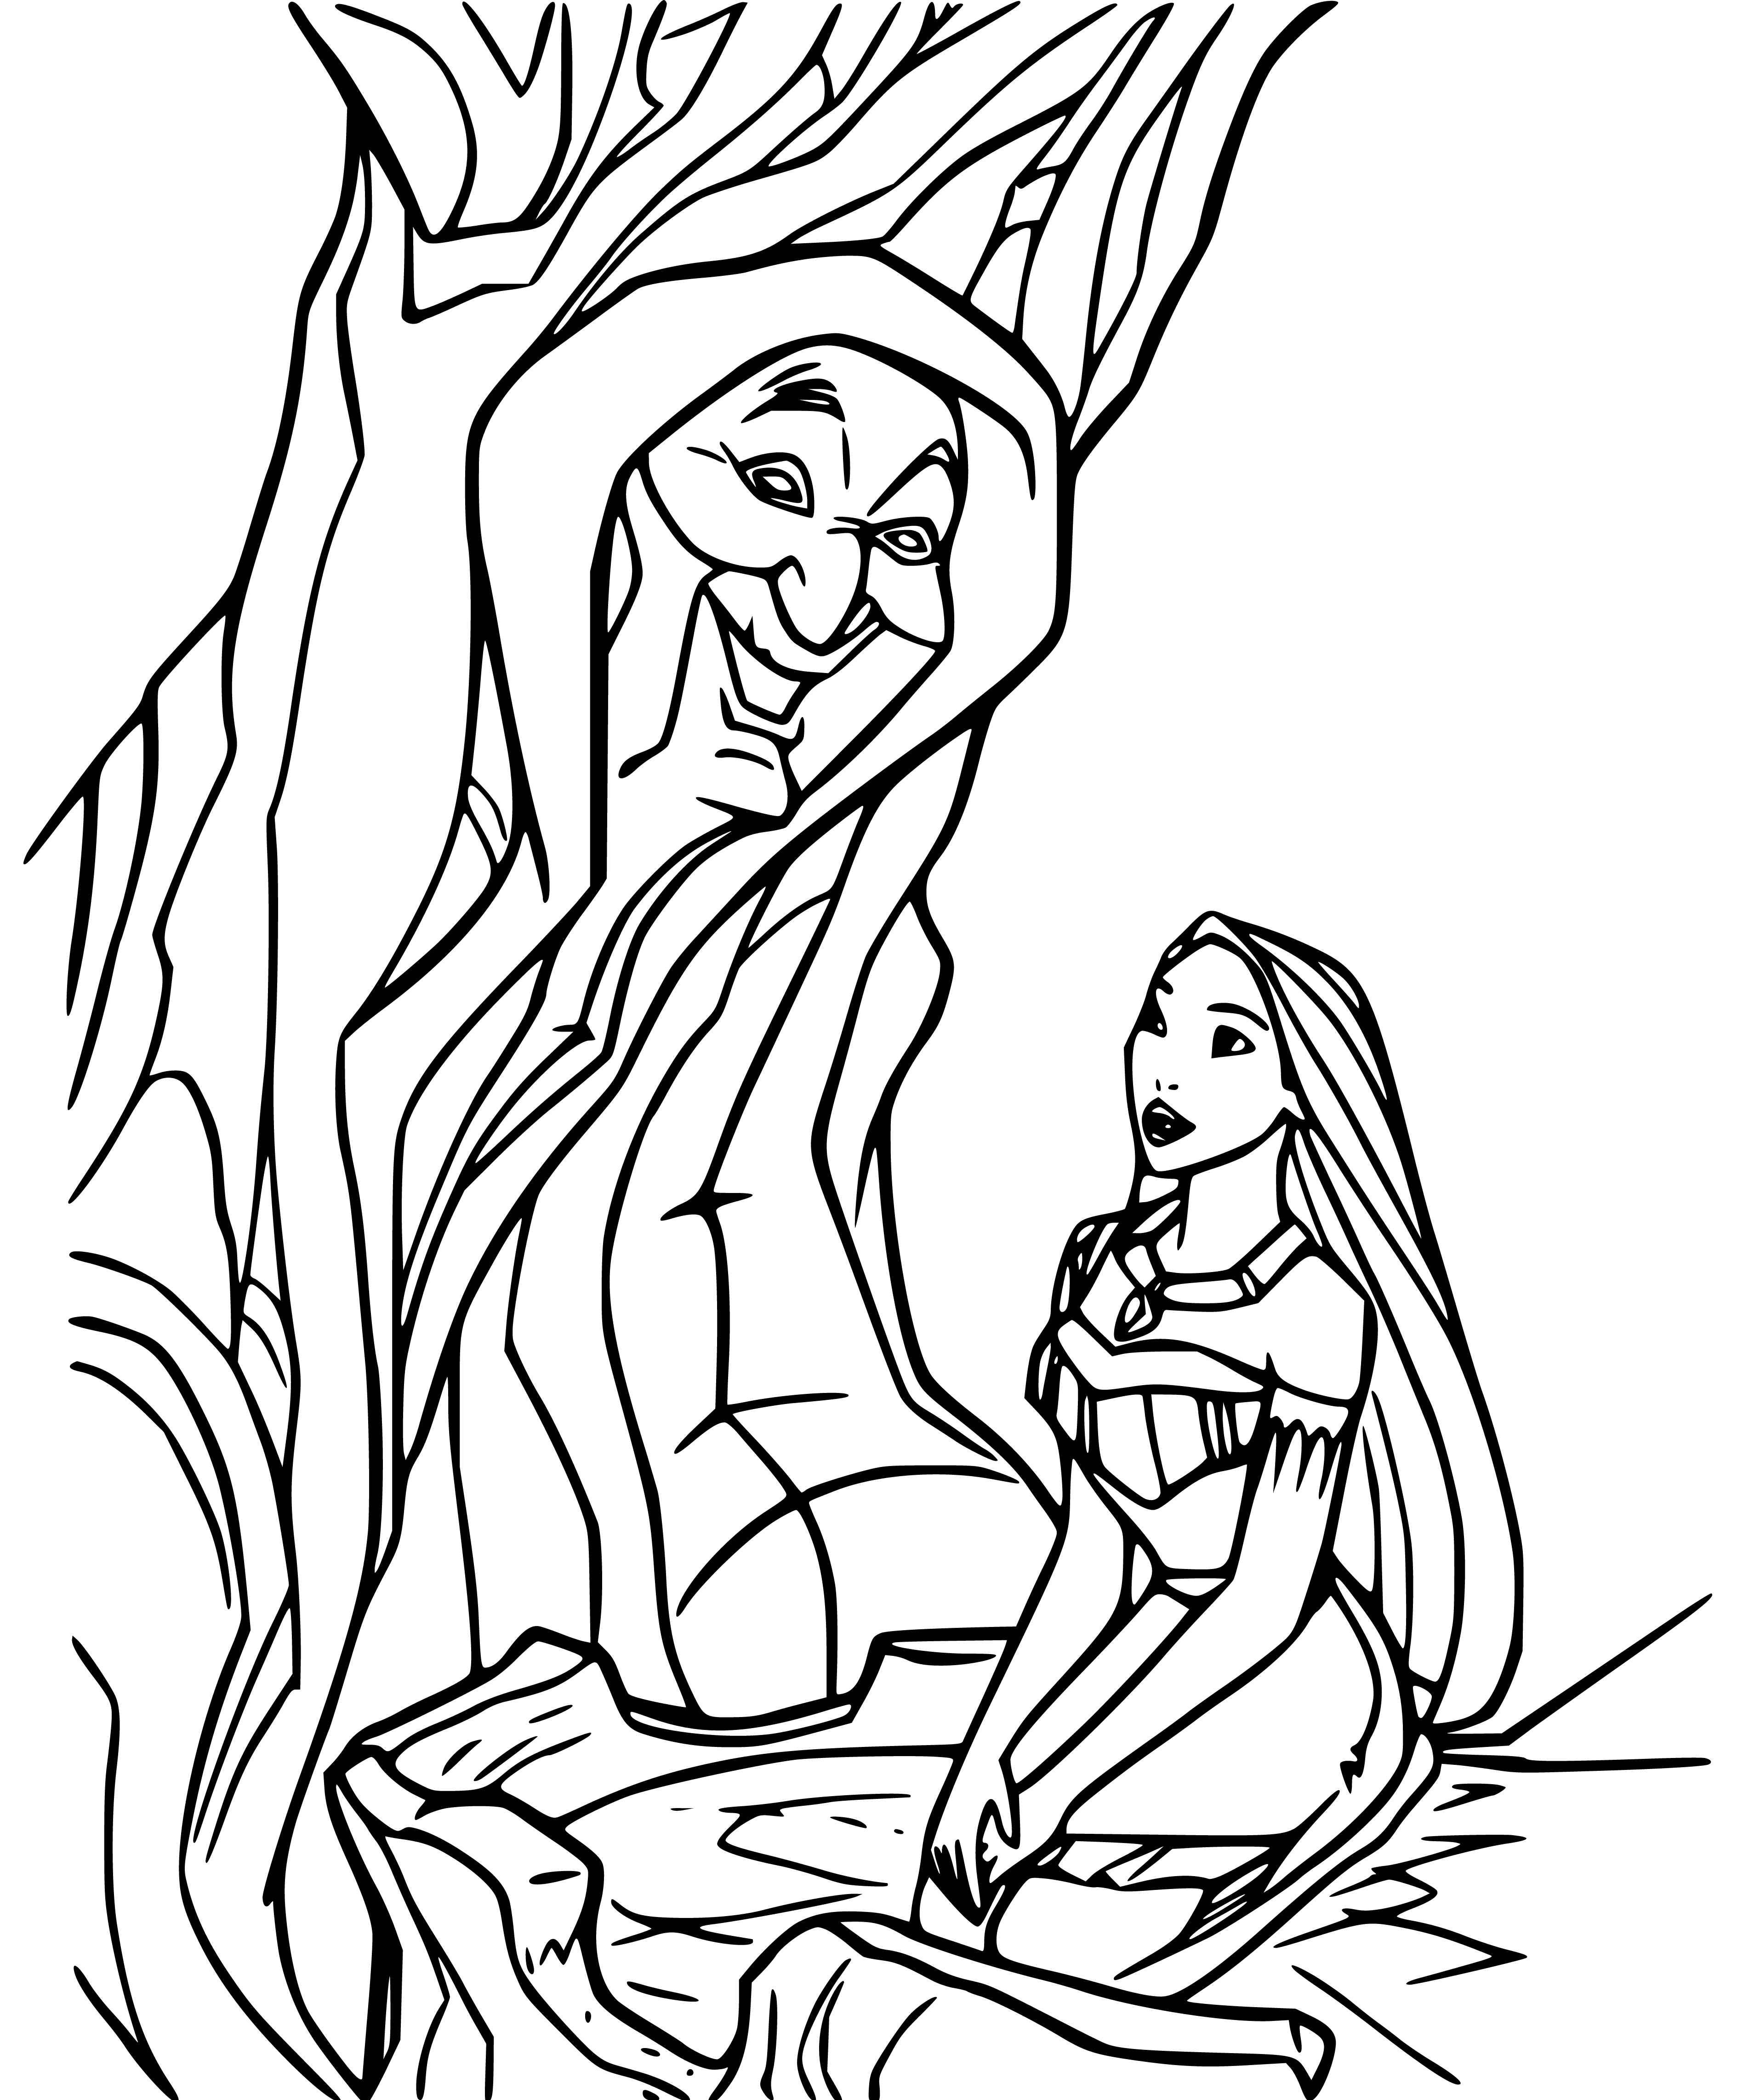 Printable Grandmother Willow speaks to Pocahontas Coloring Page for kids.